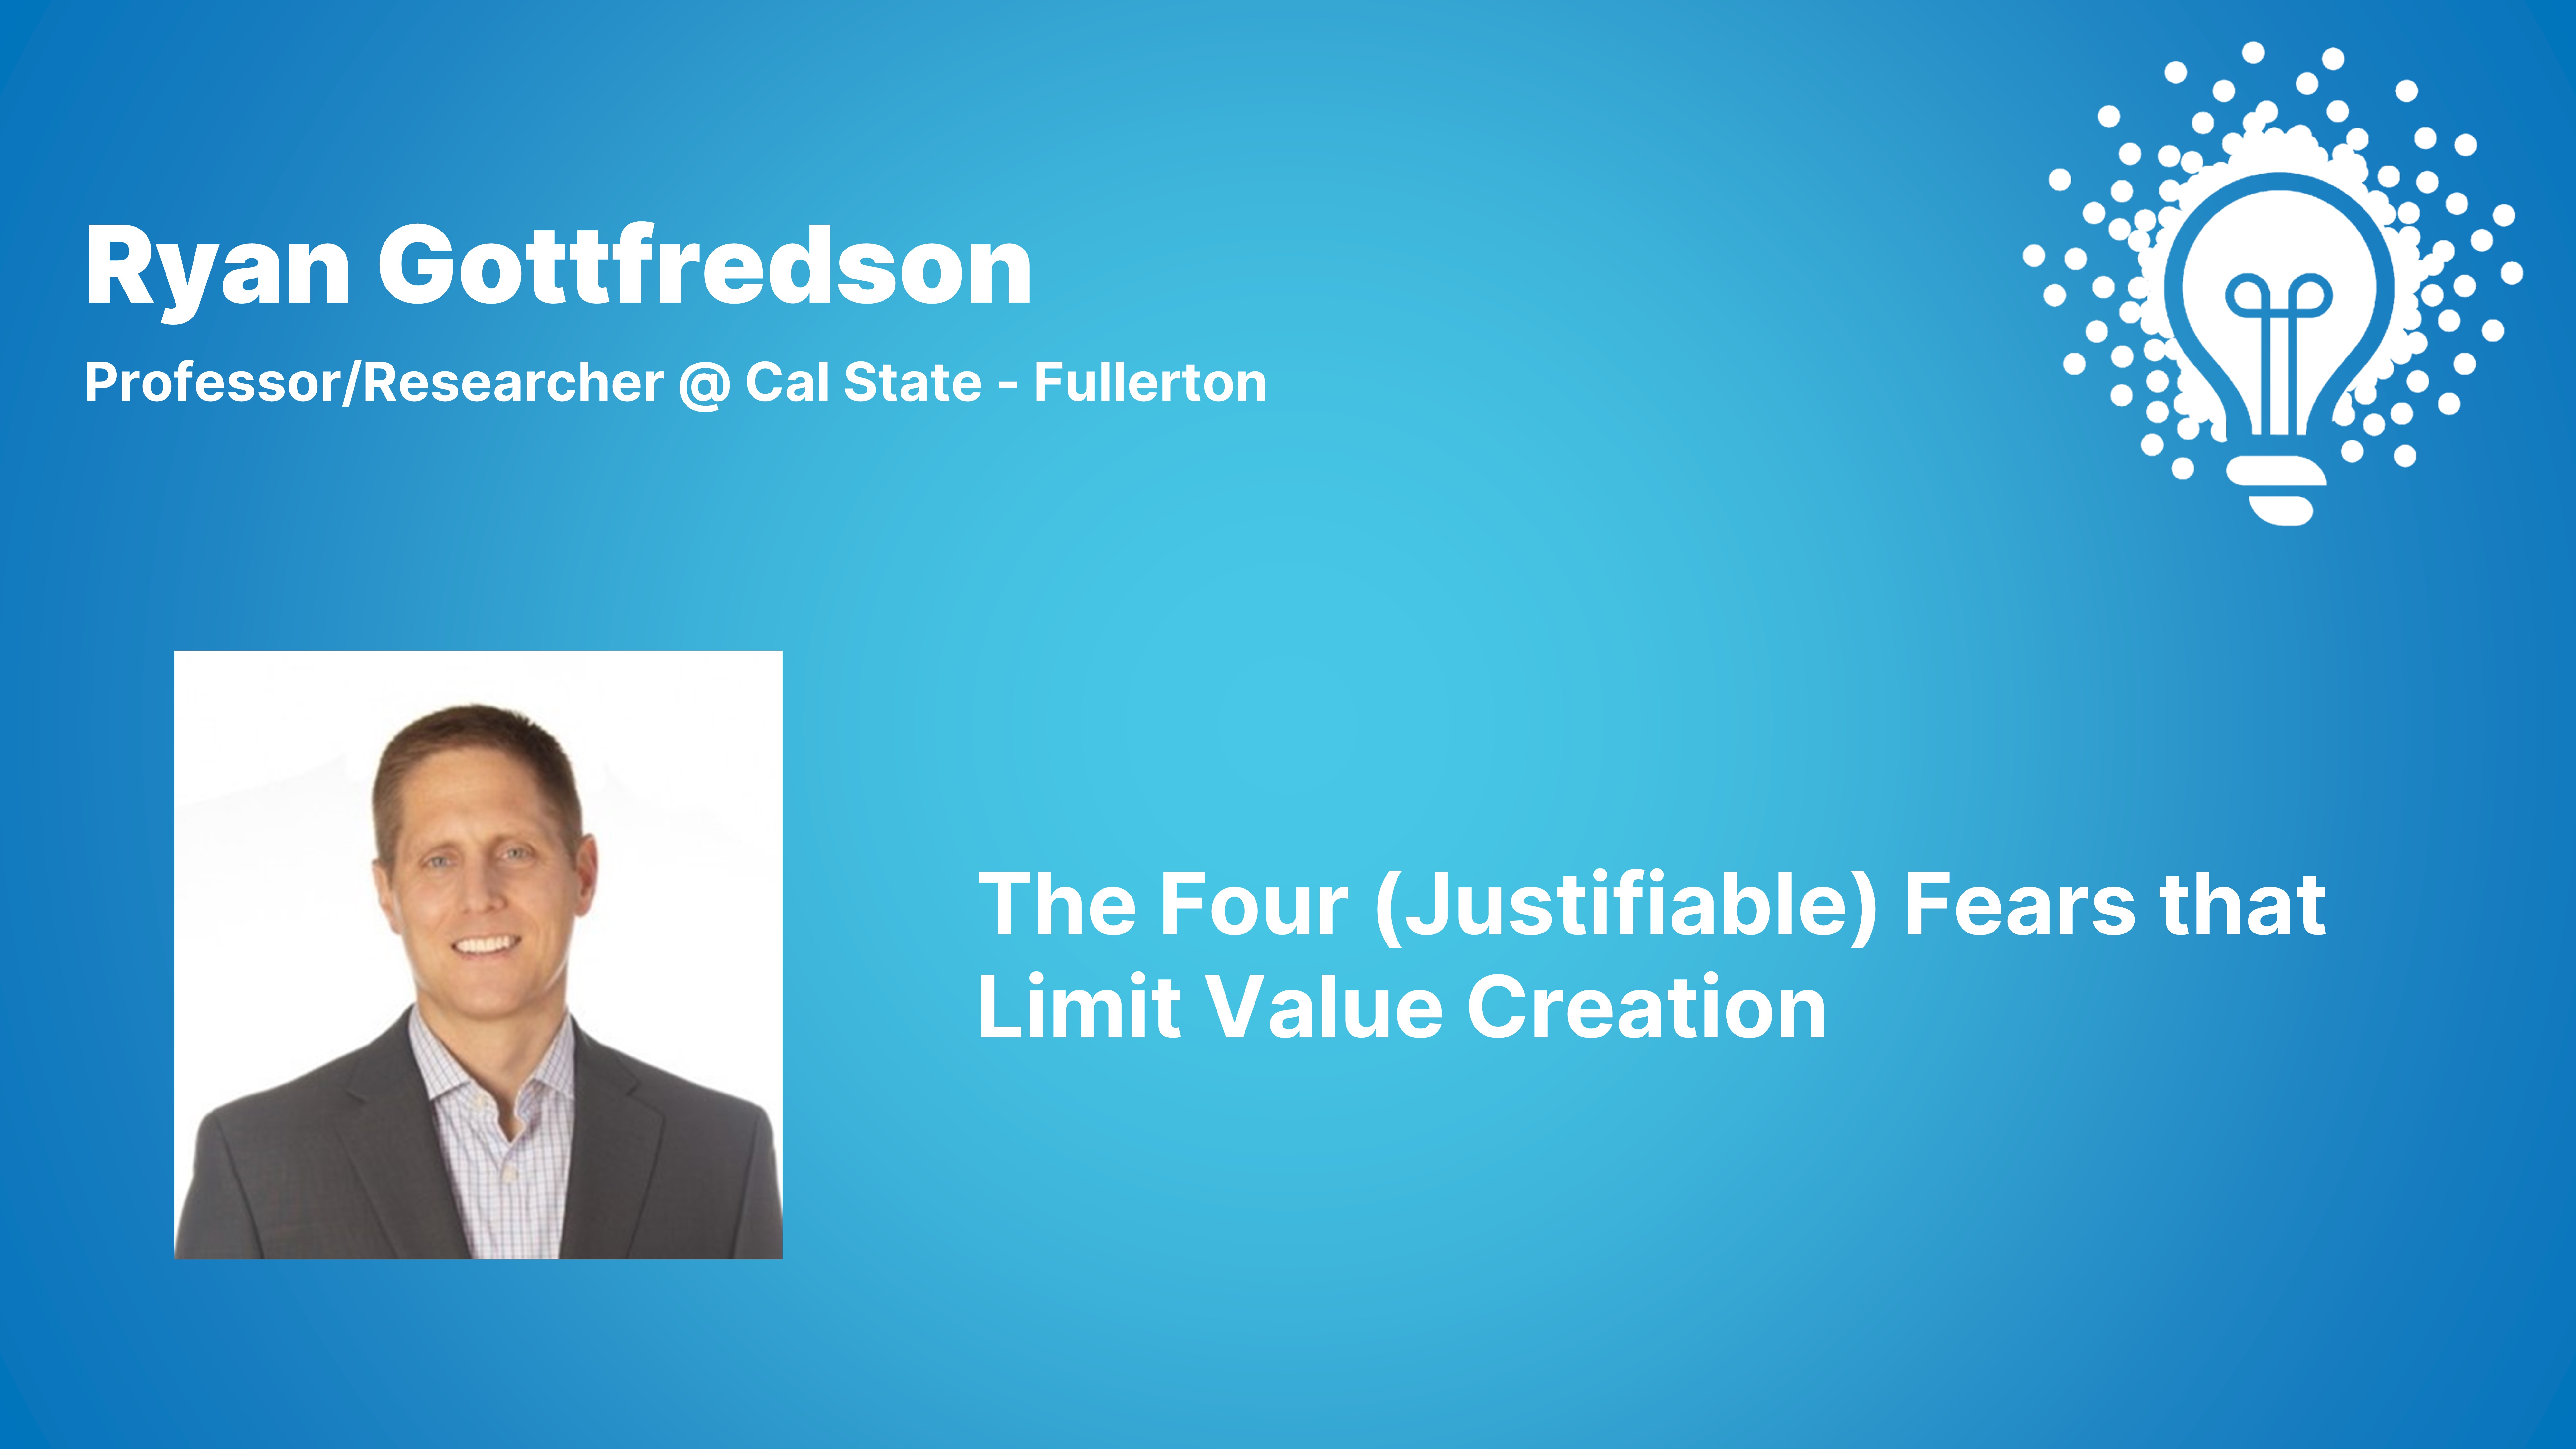 The Four (Justifiable) Fears that Limit Value Creation